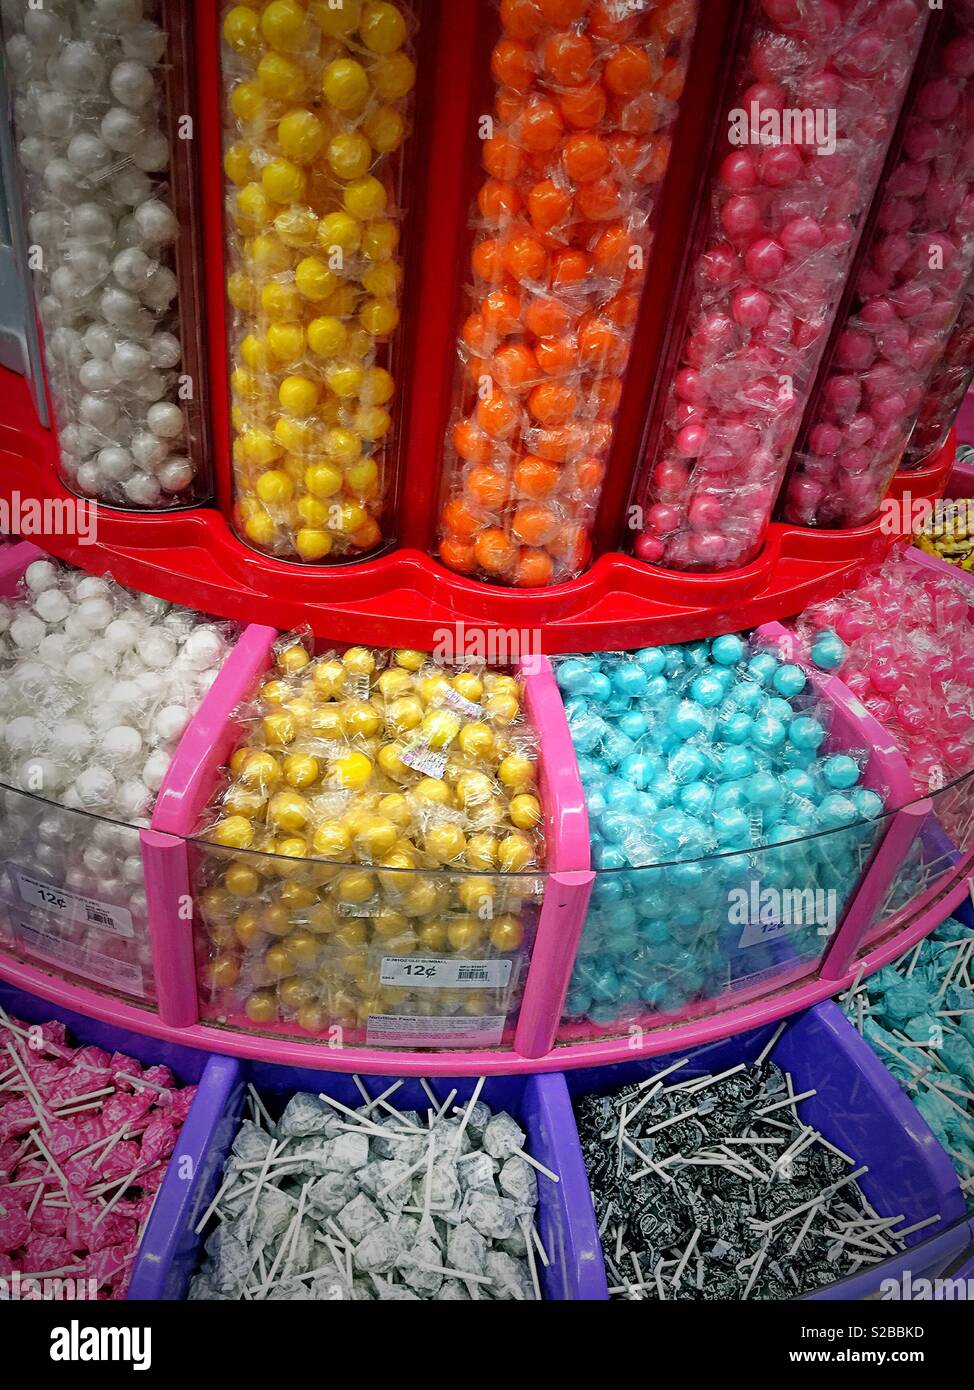 Candy Display in a retail store, USA Stock Photo